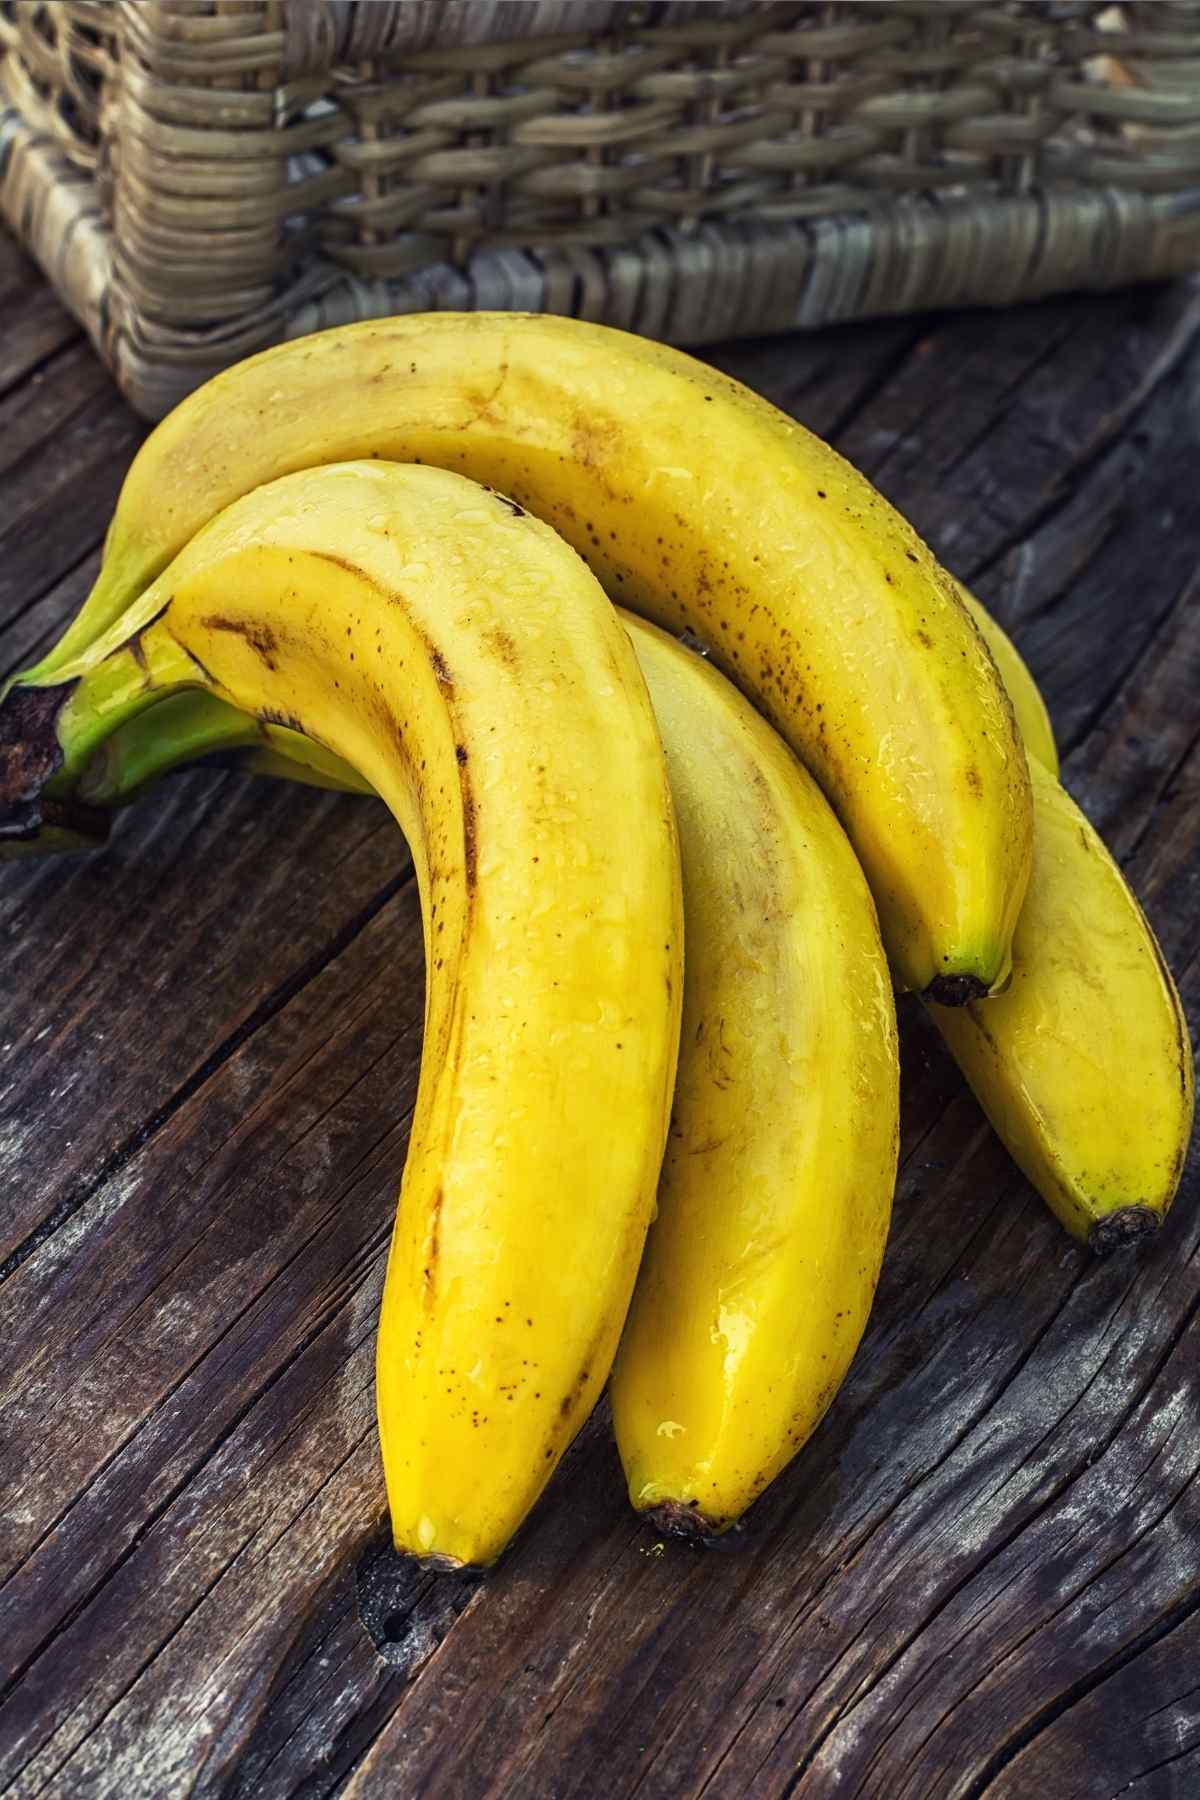 It may be hard to believe that a fruit would even contain carbs, but it’s true! Depending on the size, bananas can contain about 19 to 35 grams of carbs. Don’t worry though, this fruit is still considered to be healthy and full of nutrients.